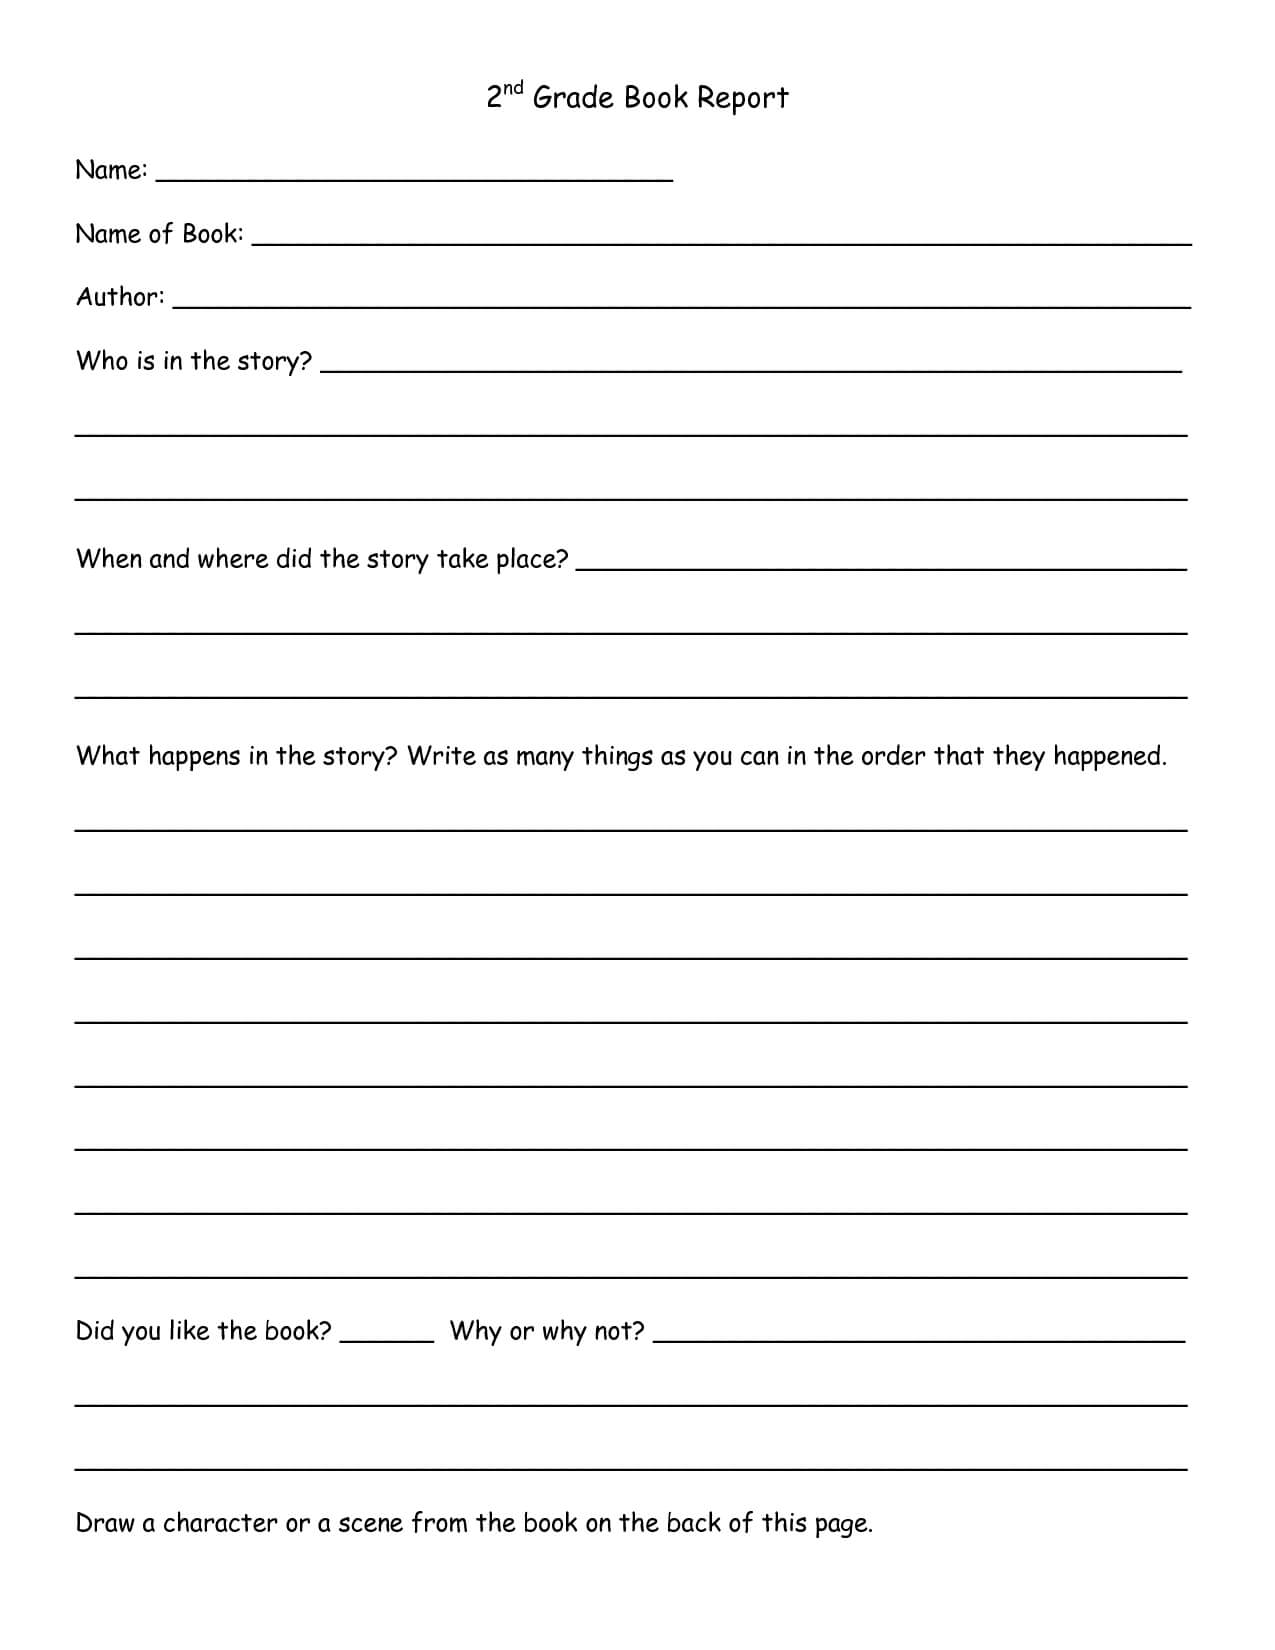 2Nd Grade Book Report Template - Google Search | 2Nd Grade for 2Nd Grade Book Report Template